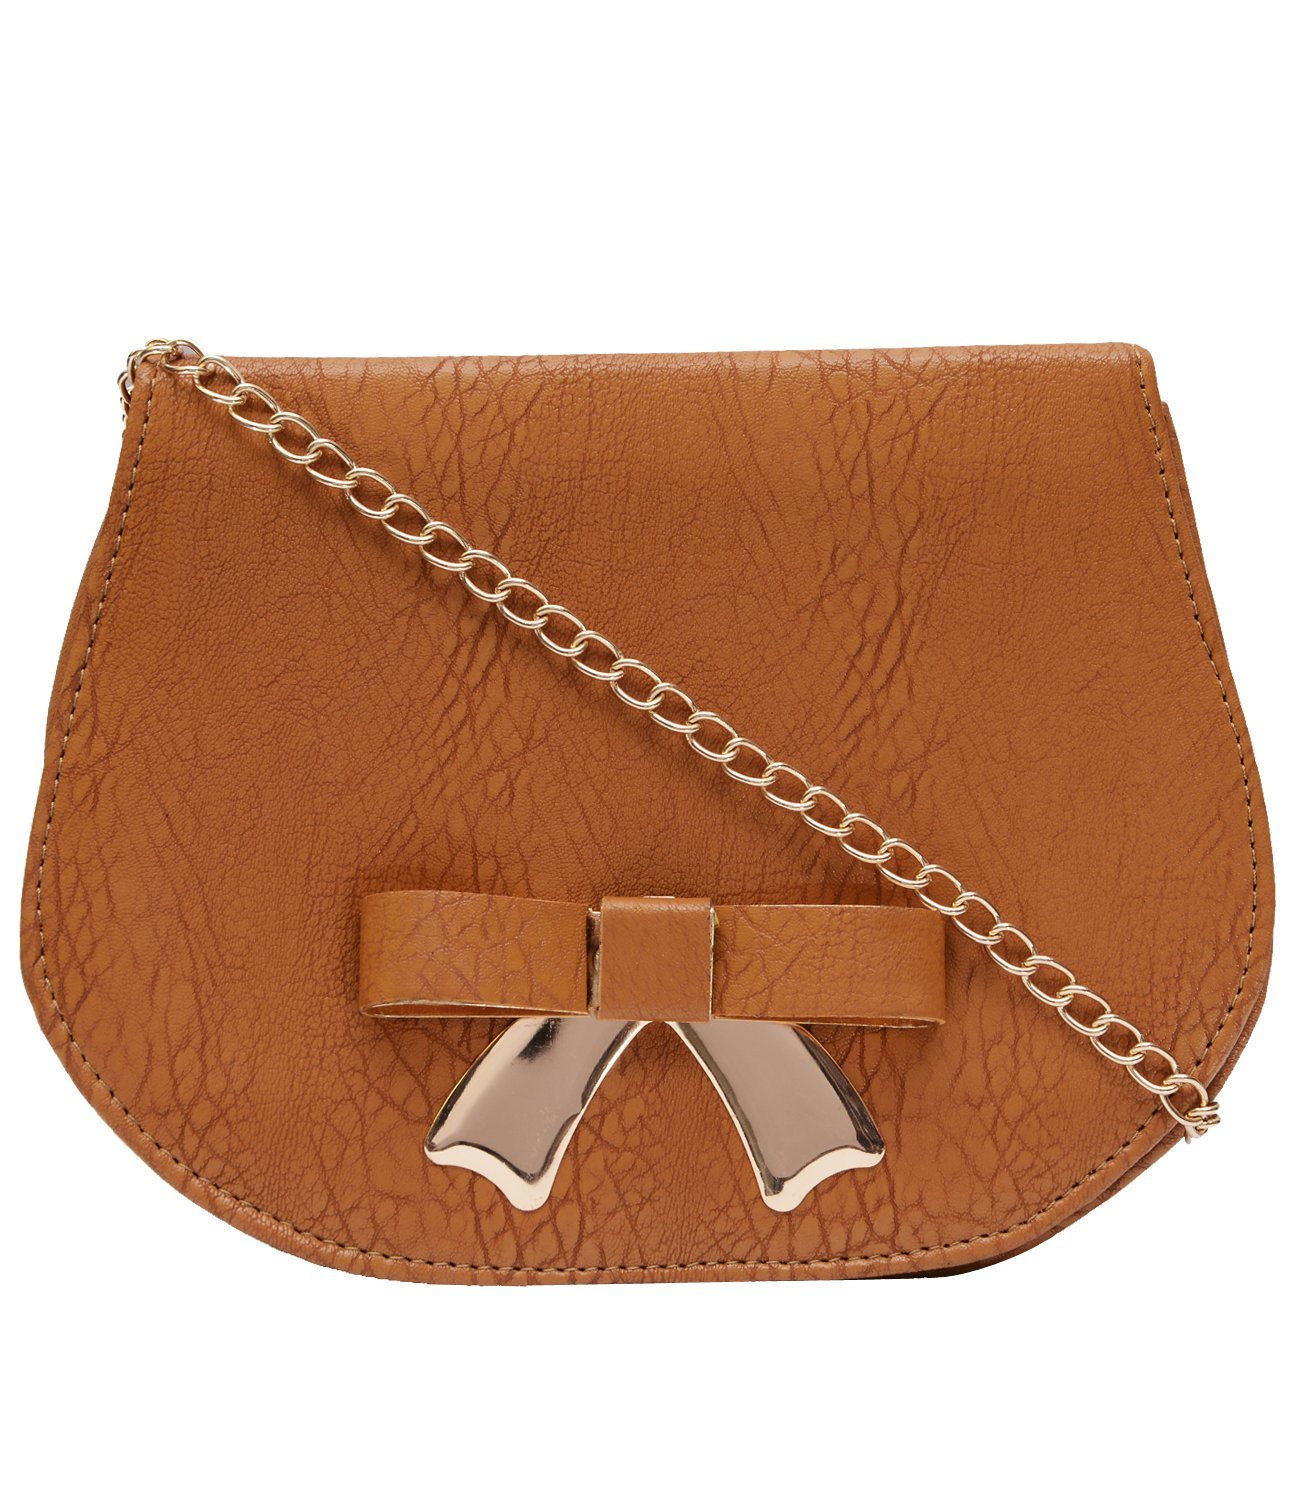 Fristo Women’s Slingbag (FRSB-072)Tan at Rs 269 only